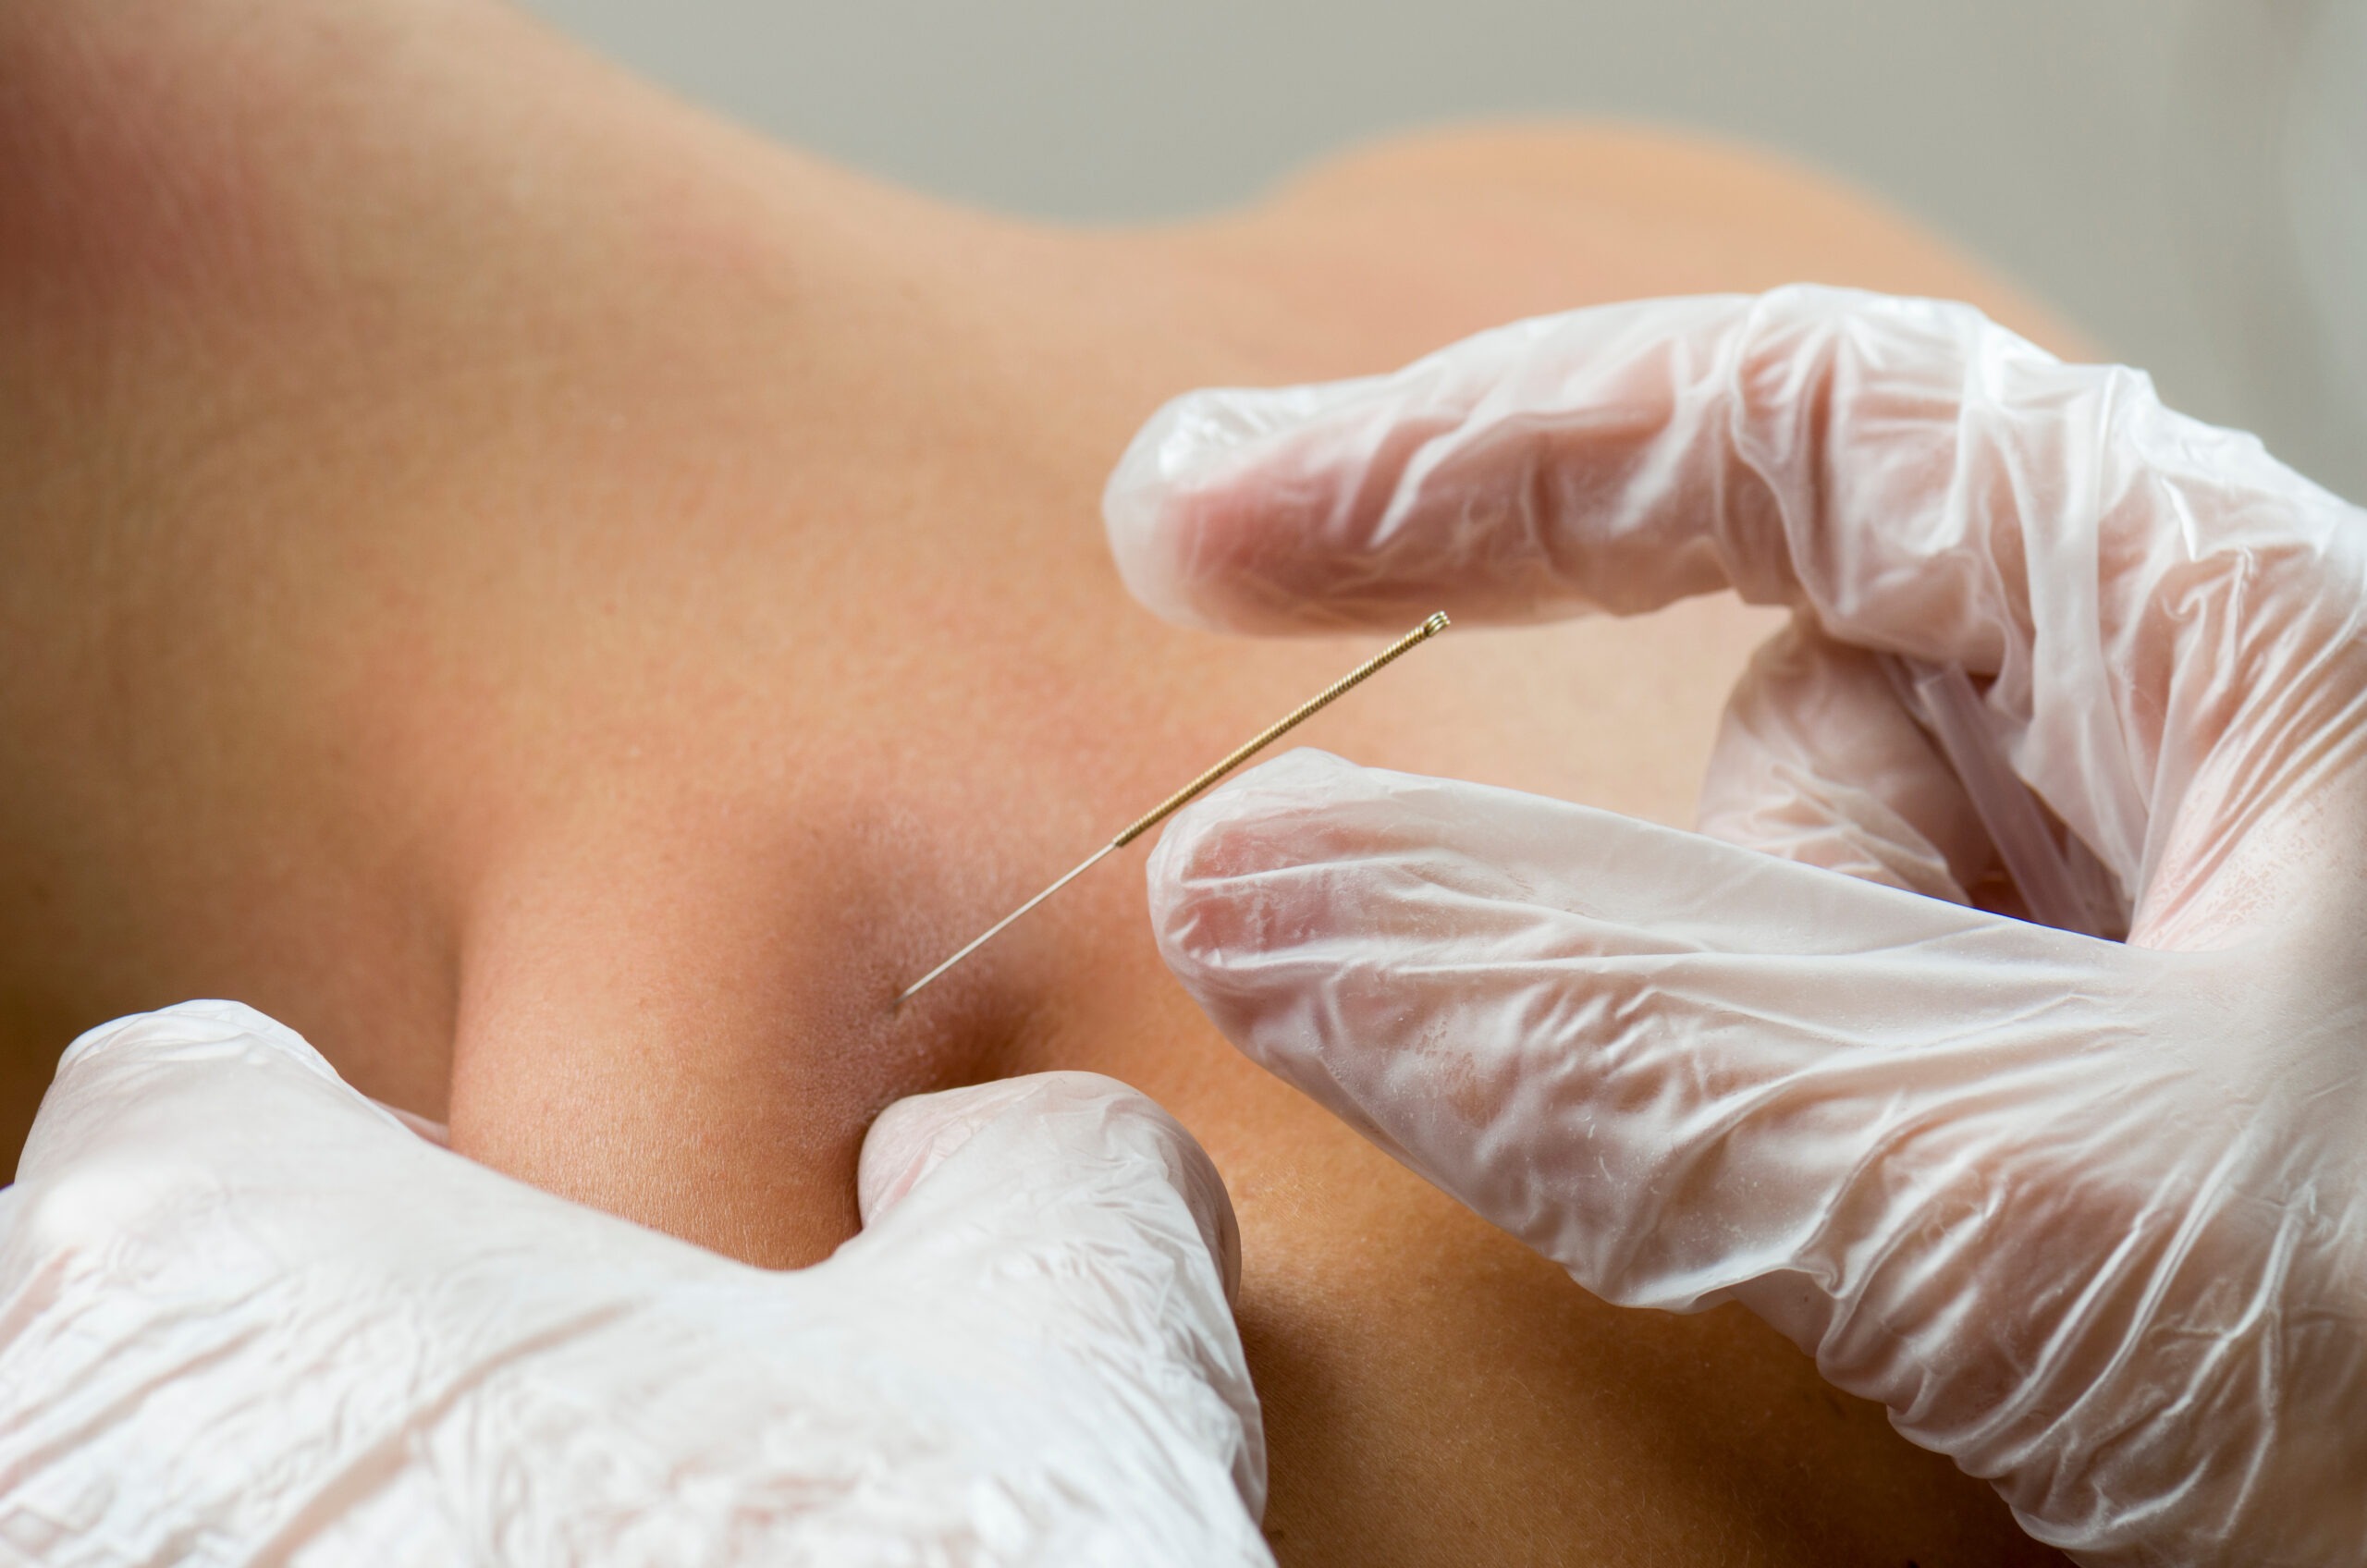 Closeup of a needle and hands of physical therapist doing a dry needling treatment on someones upper back.